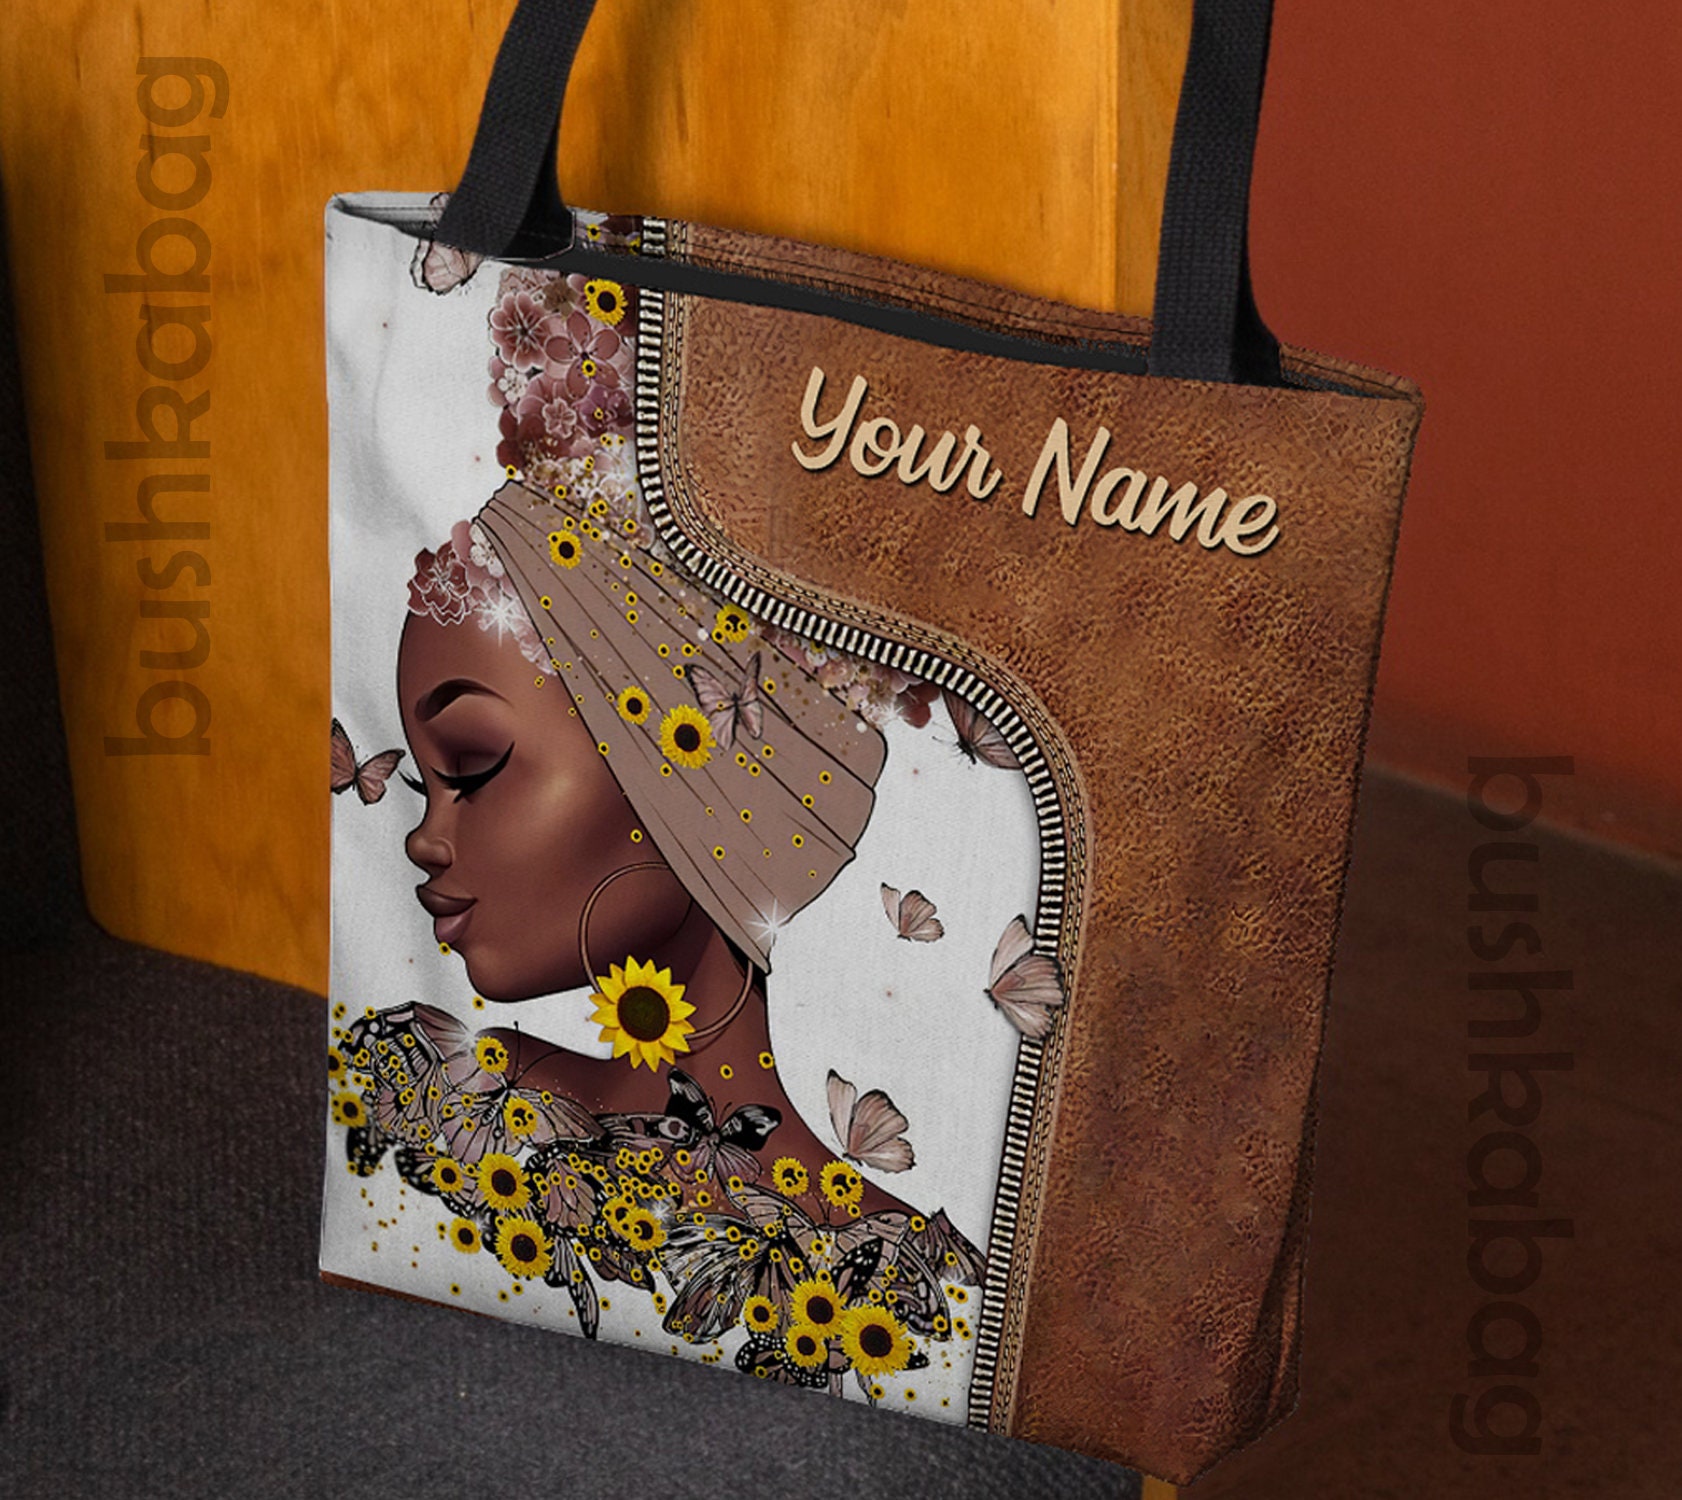 Custom Painting on Any Bag. Does Not Include Bag. Client -  in 2023